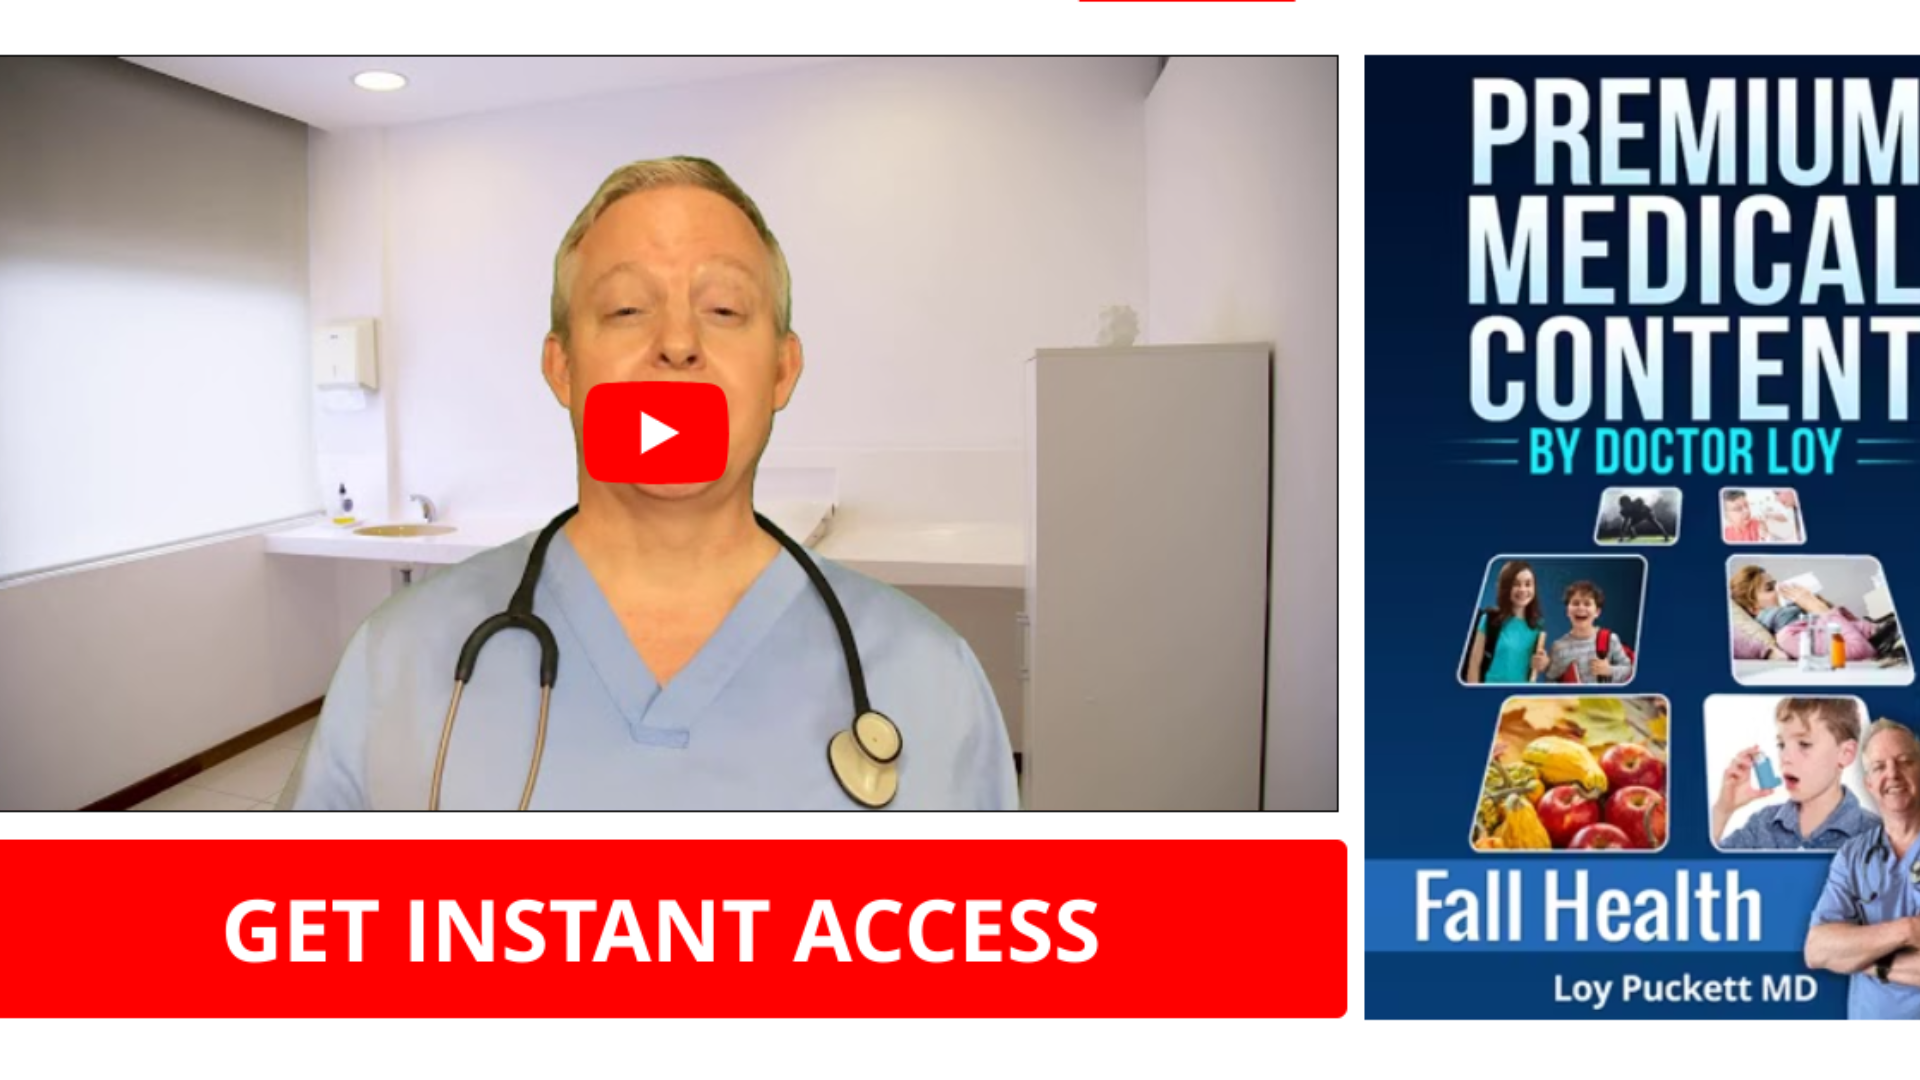 (PLR) Premium Medical Content By Doctor Loy: Fall Health Review